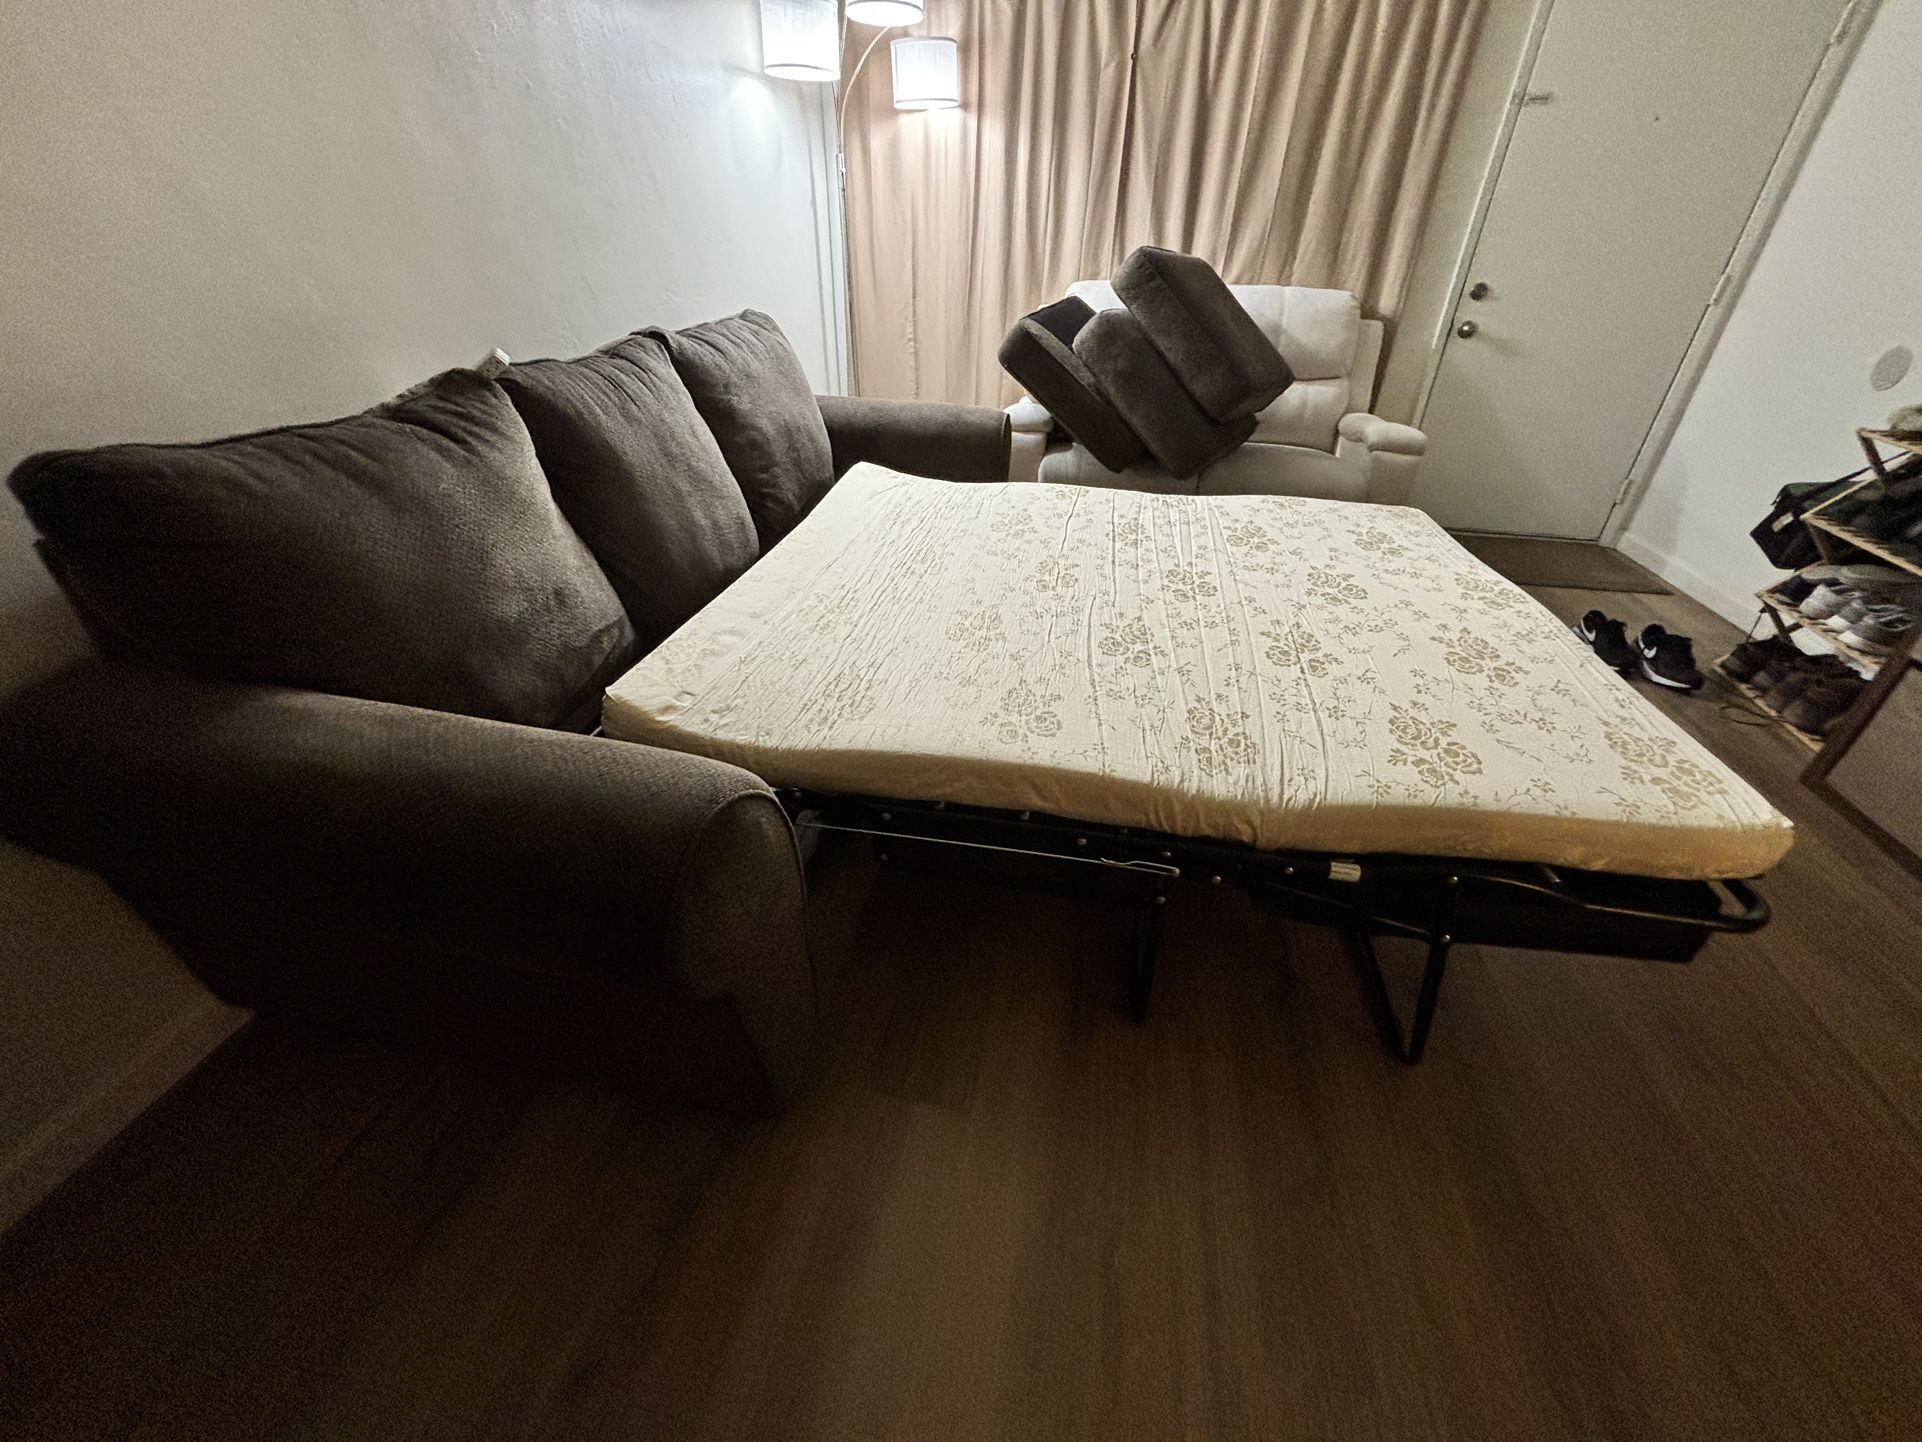 Couch/Bed Furniture